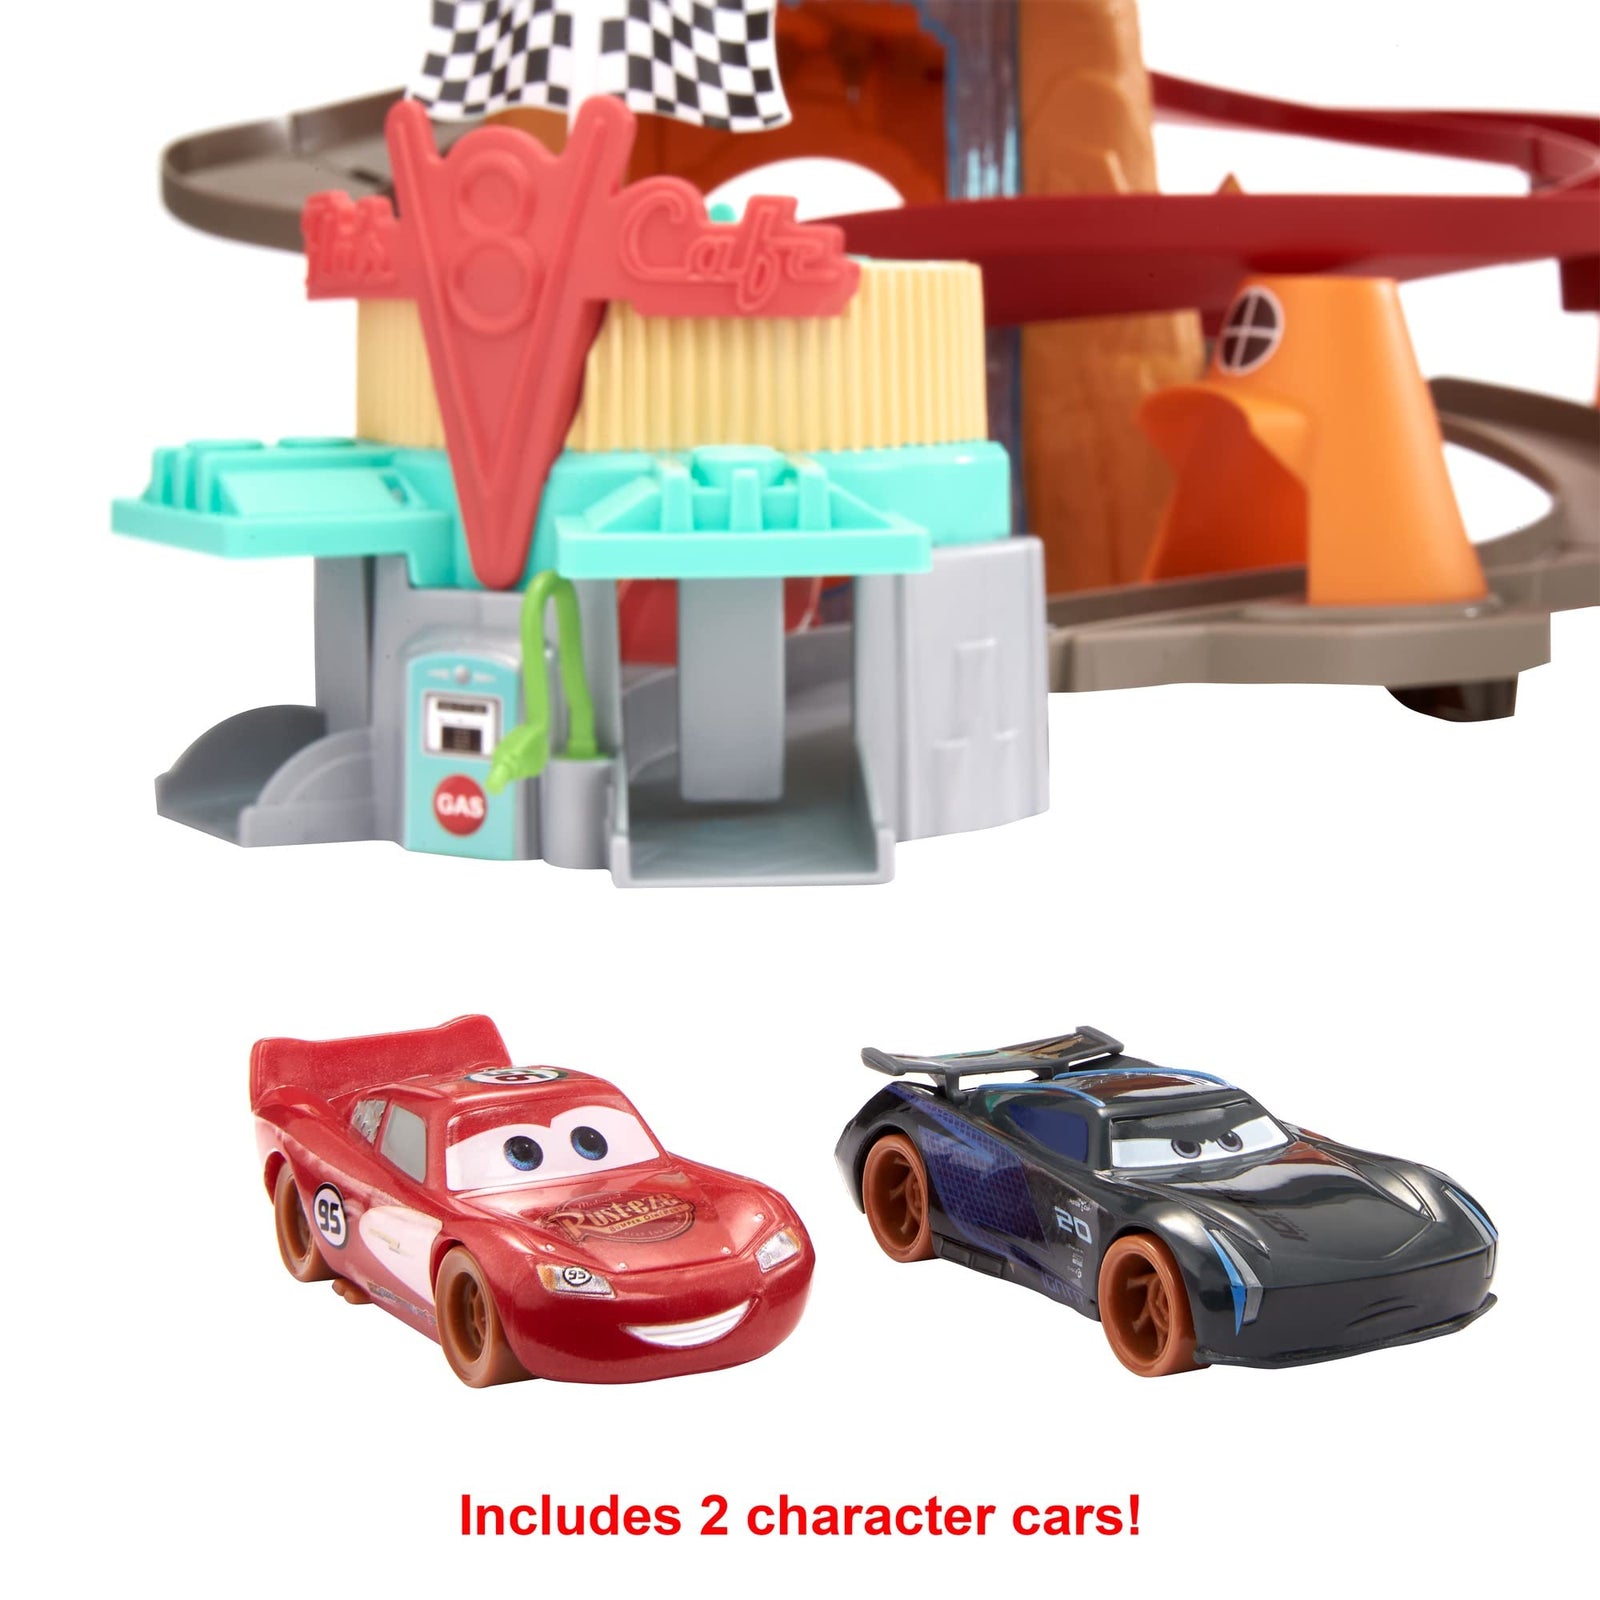 Radiator Springs Mountain Race Playset, Complete Racing Play with Two Vehicles, Gift for Cars Fans Ages 4 Years and Older